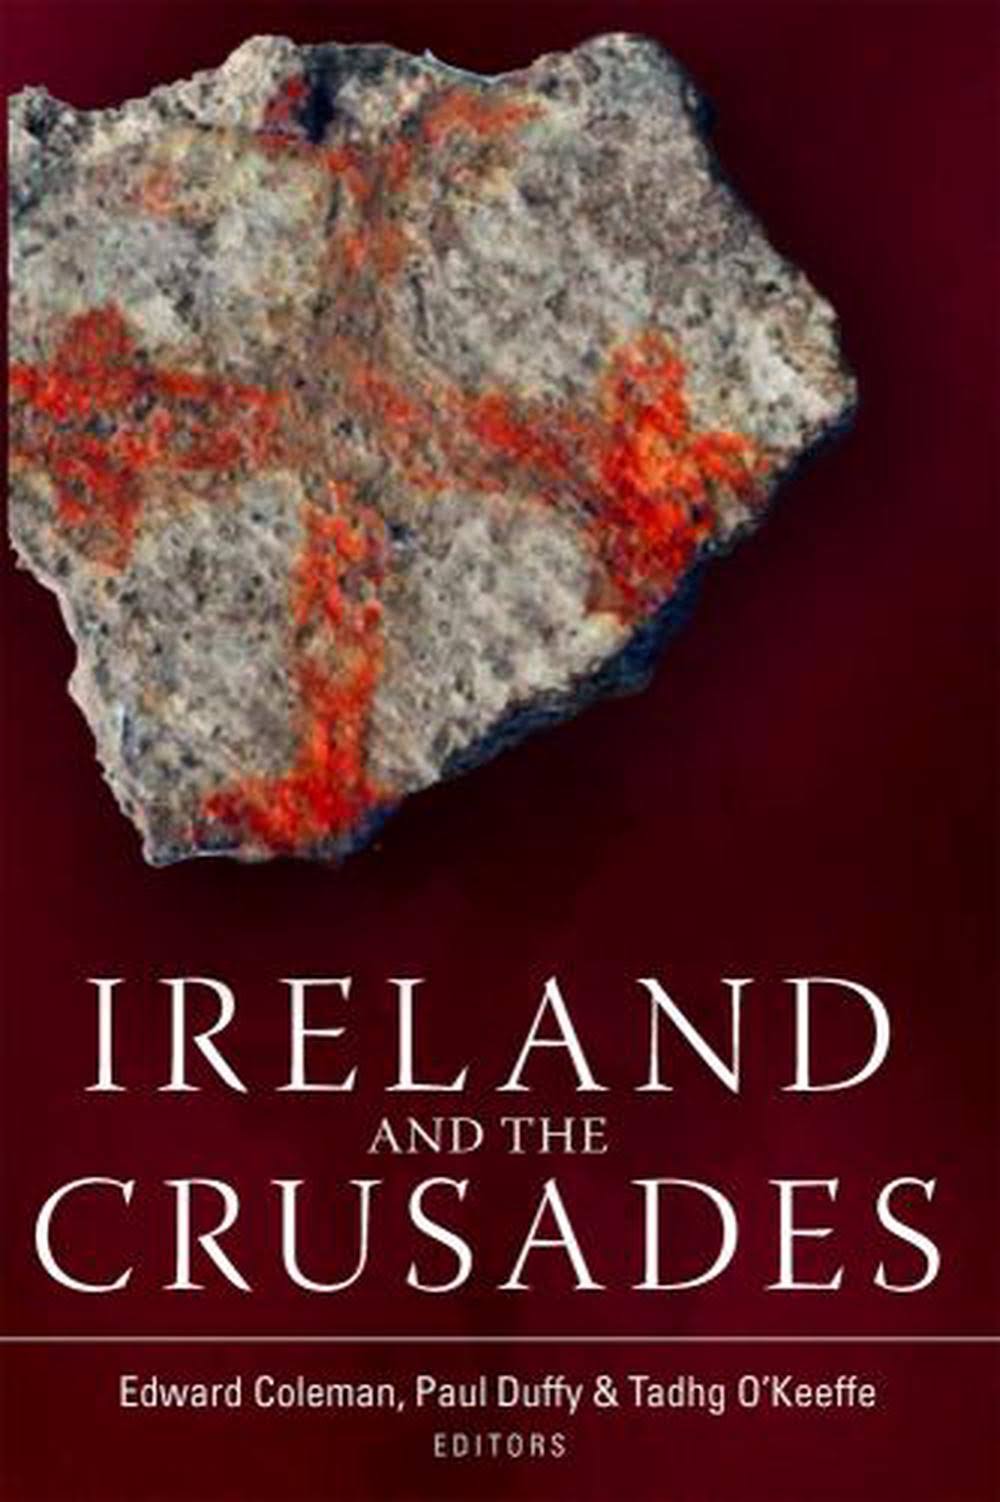 Ireland and The Crusades by Edward Coleman